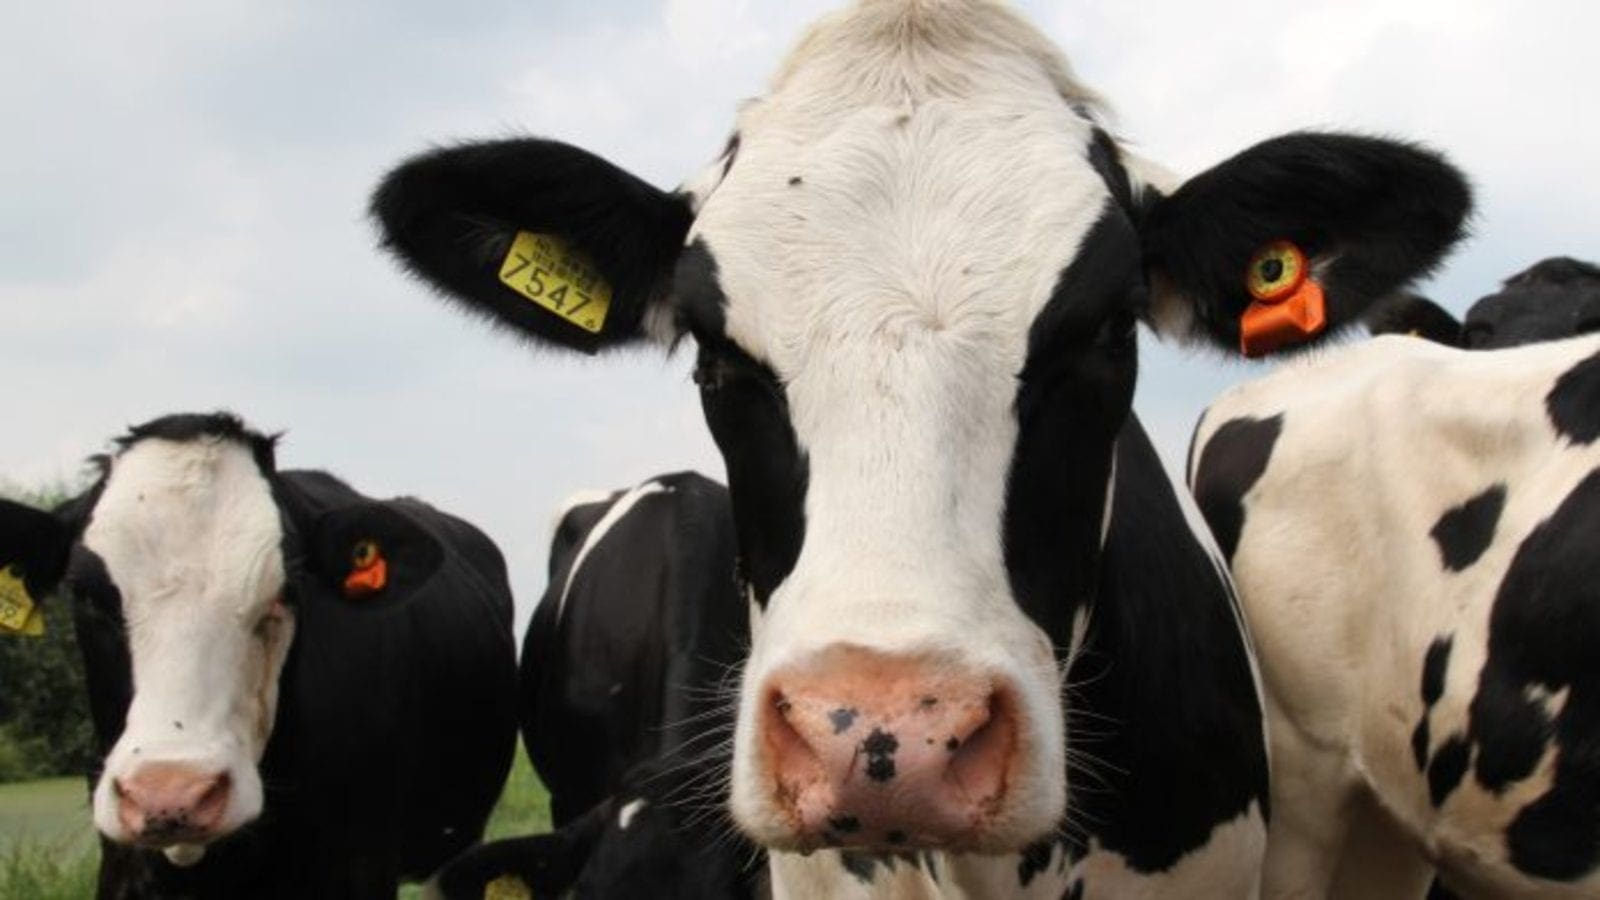 Starbucks, Arla partner to explore sustainable solutions for dairy farming